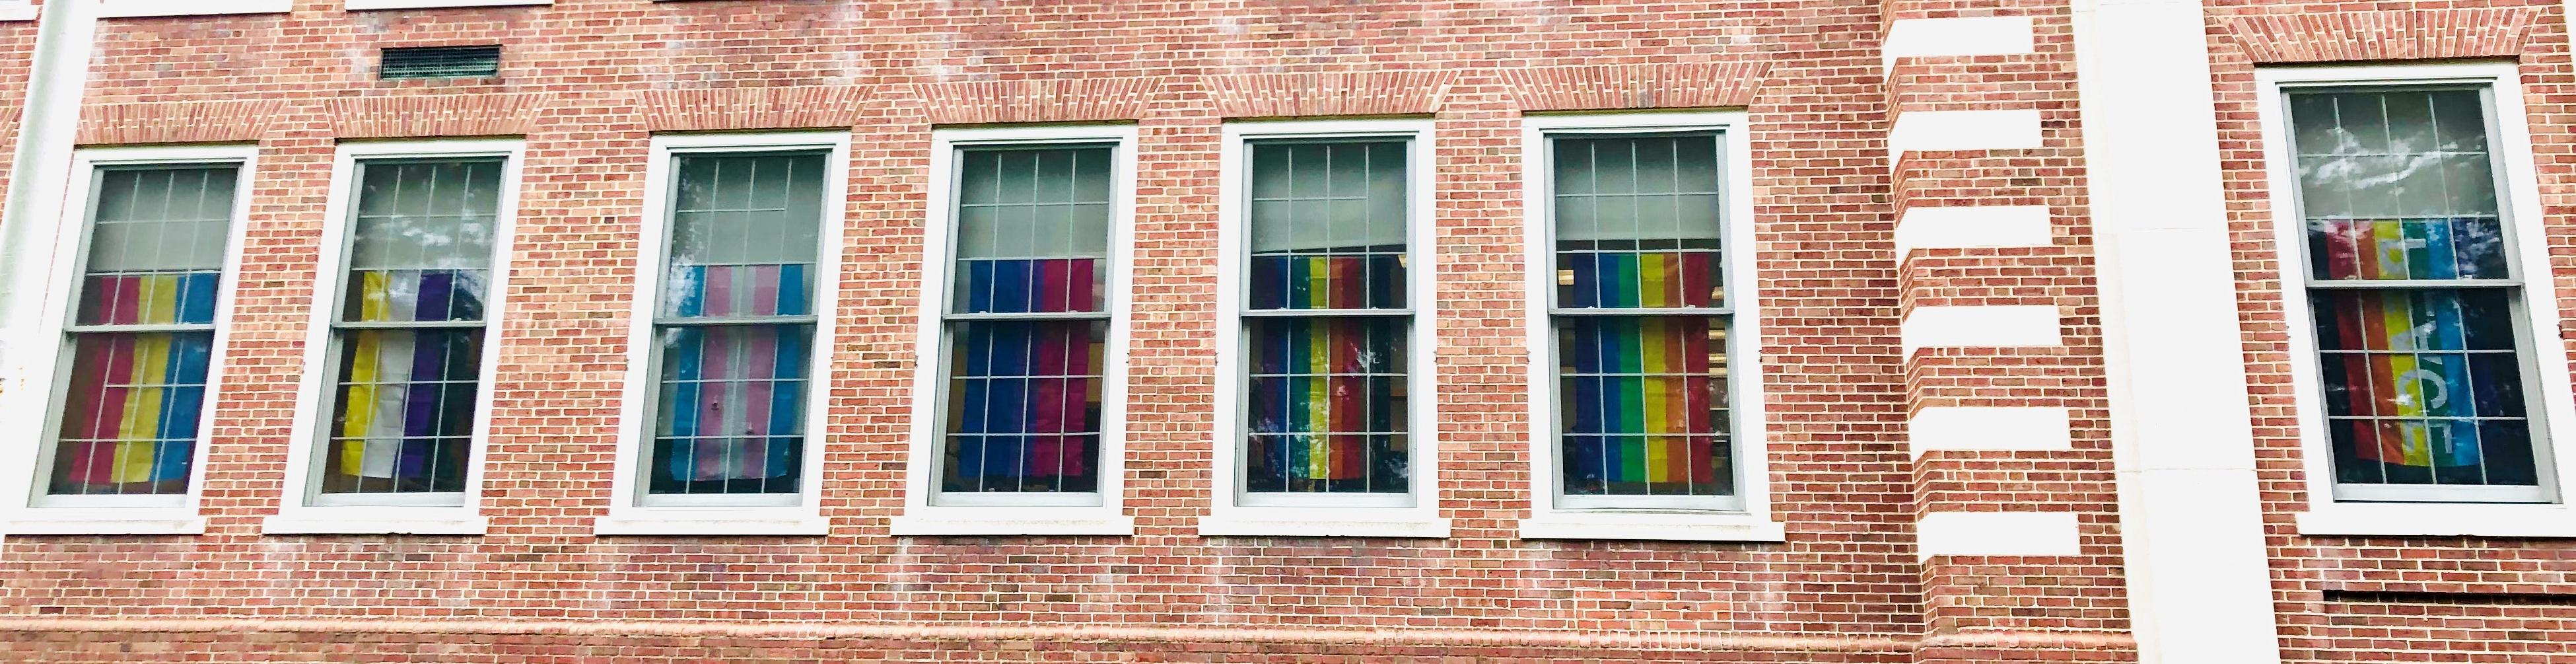 lgbtq pride flags in HR windows. from left to right: rainbow peace, rainbow, Philadelphia pride, bisexuality, transgender, nonbinary, pansexuality